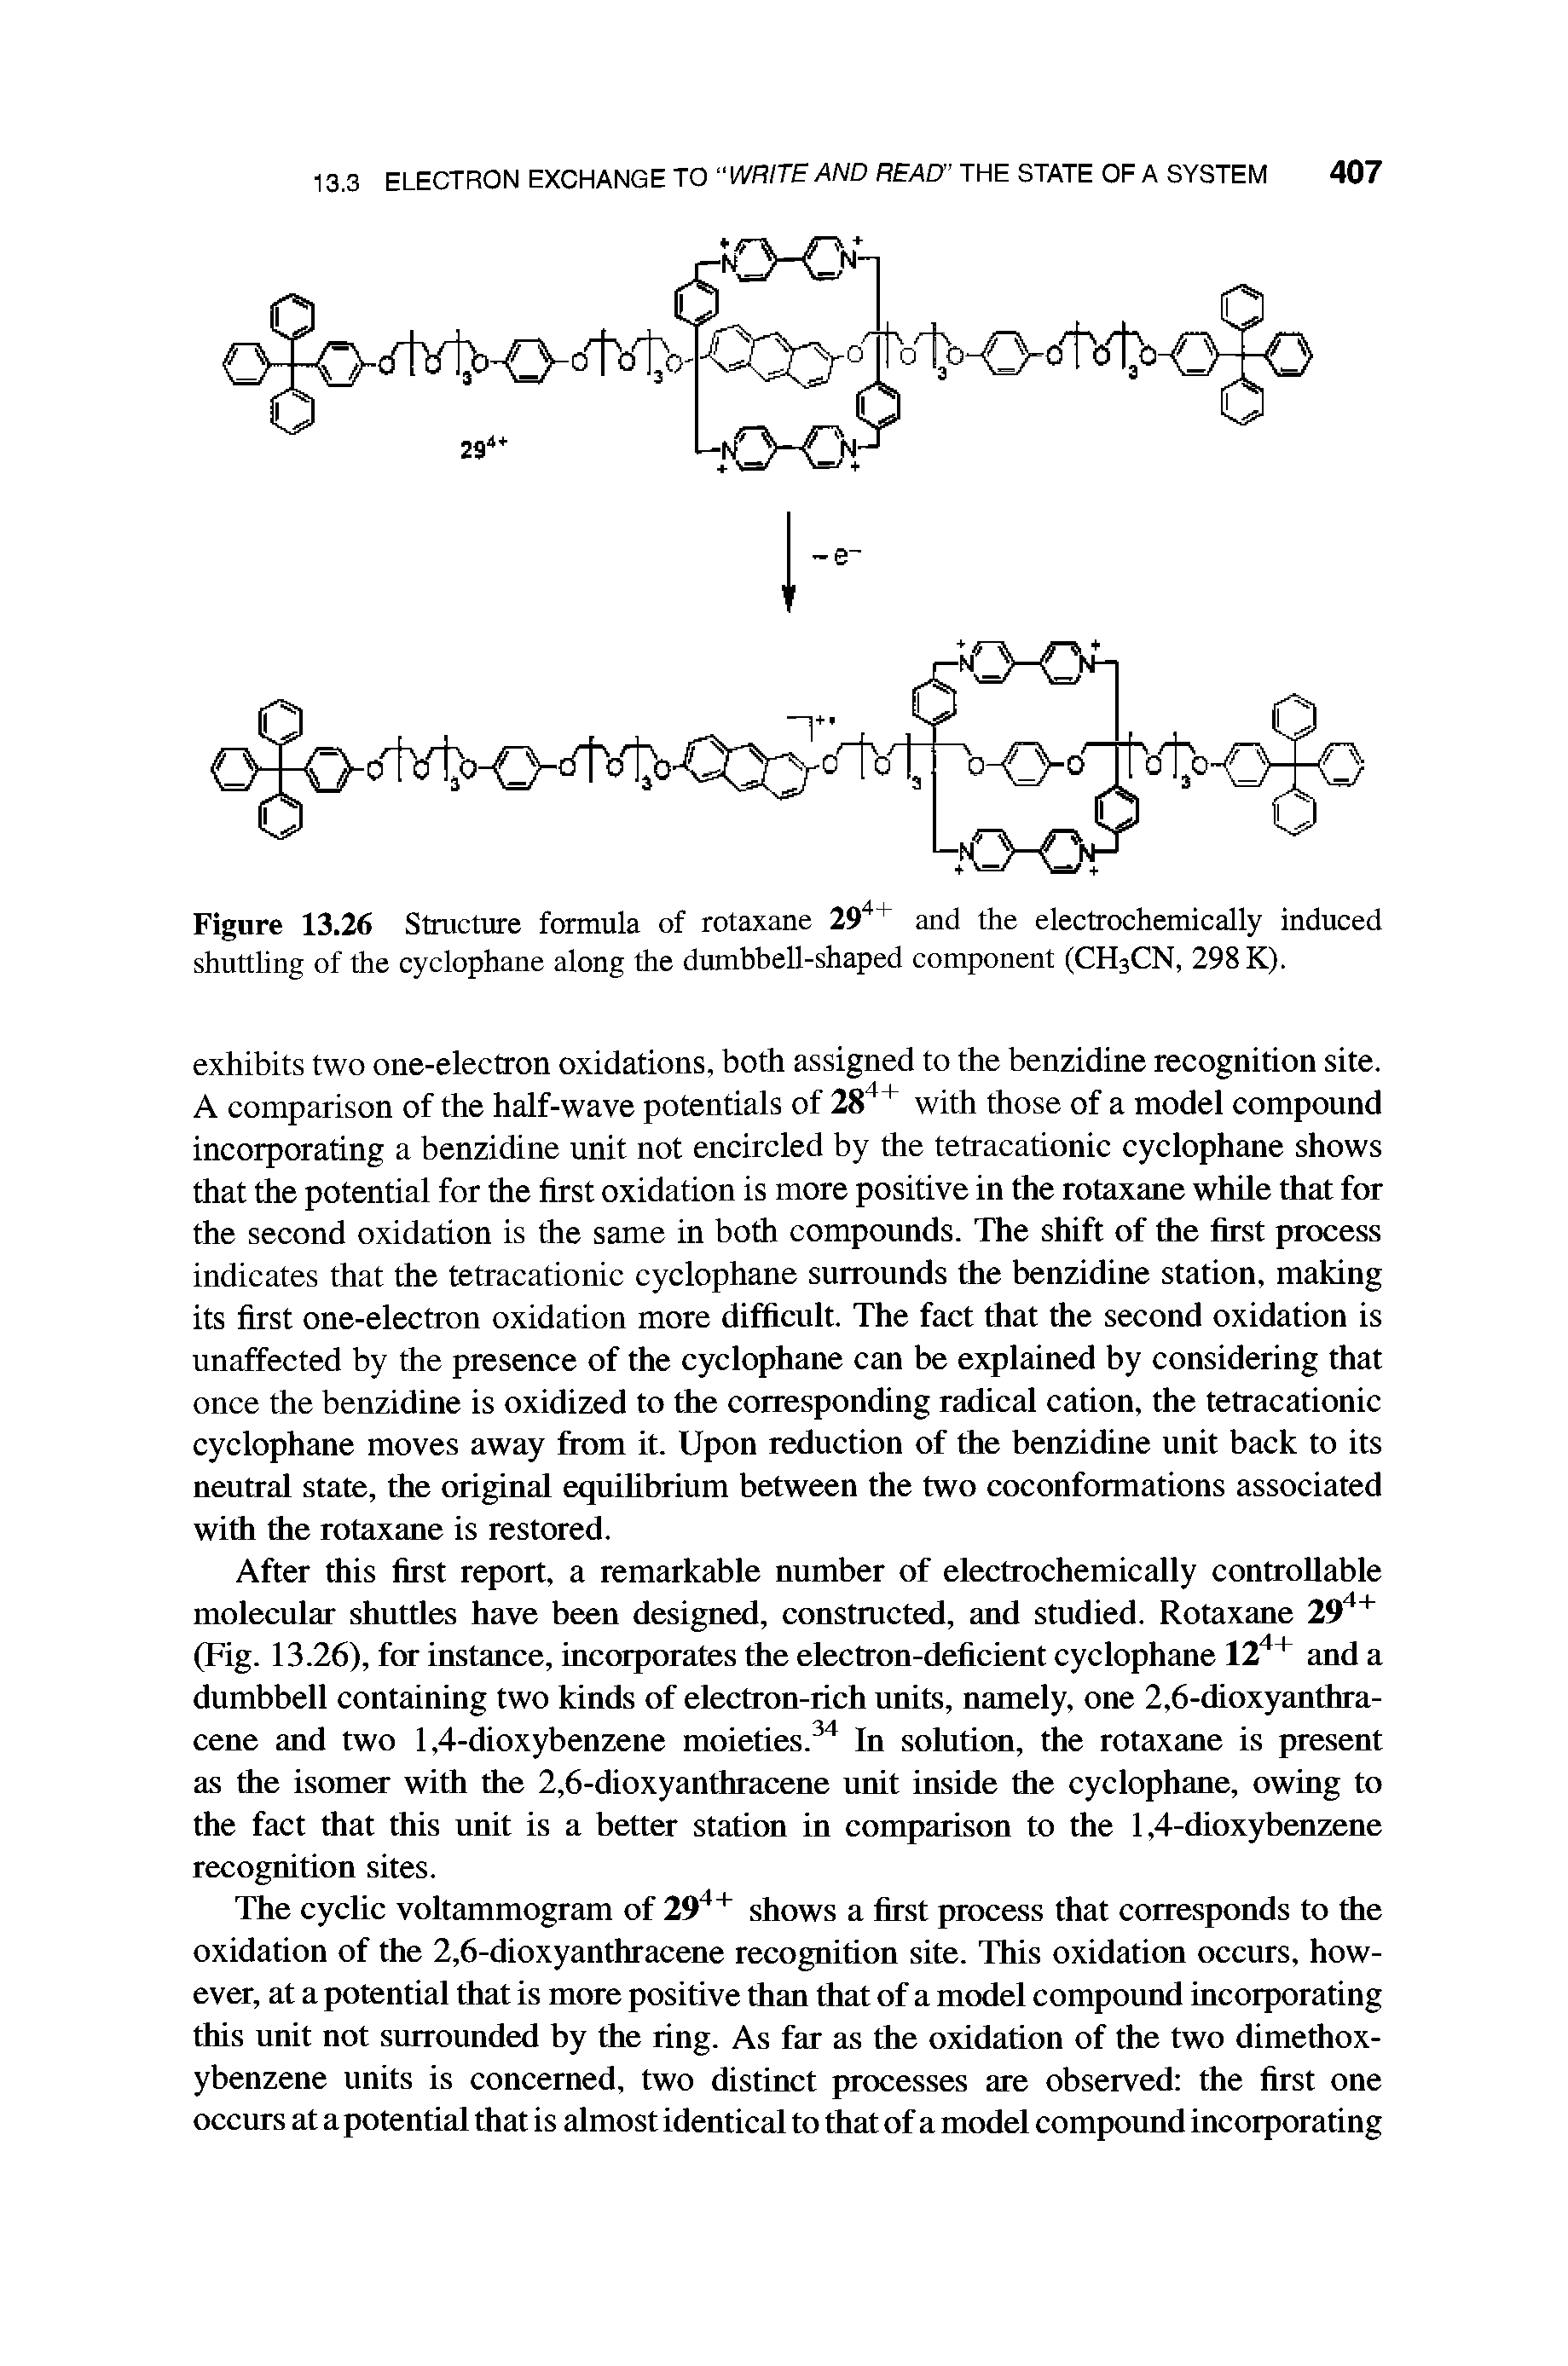 Figure 13.26 Structure formula of rotaxane 294+ and the electrochemically induced shuttling of the cyclophane along the dumbbell-shaped component (CH3CN, 298 K).